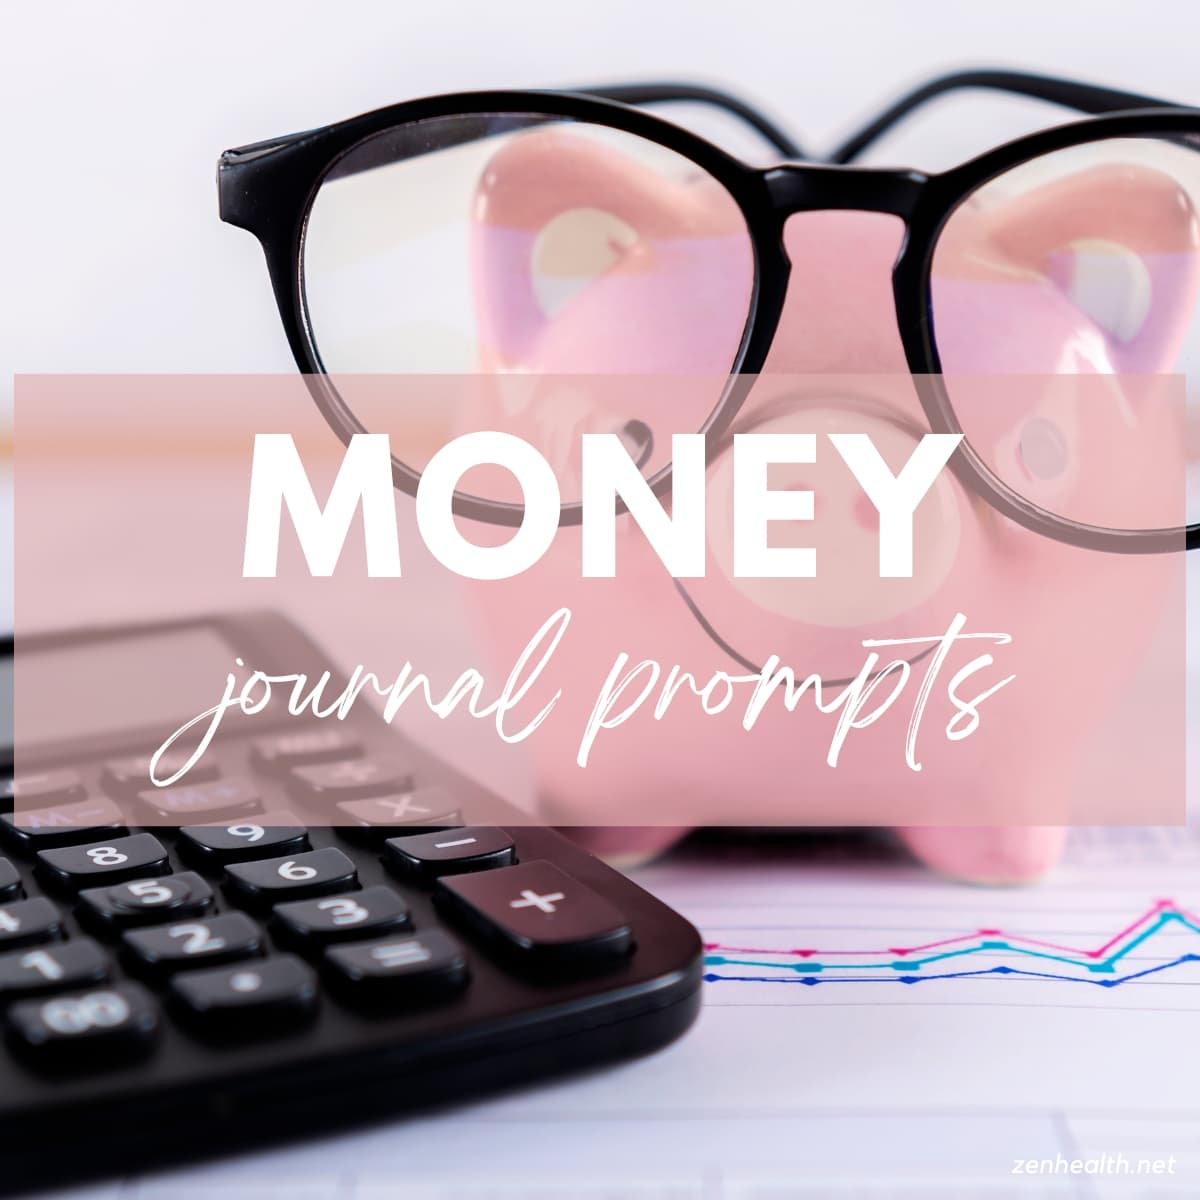 80 Money Journal Prompts about Management and Abundance